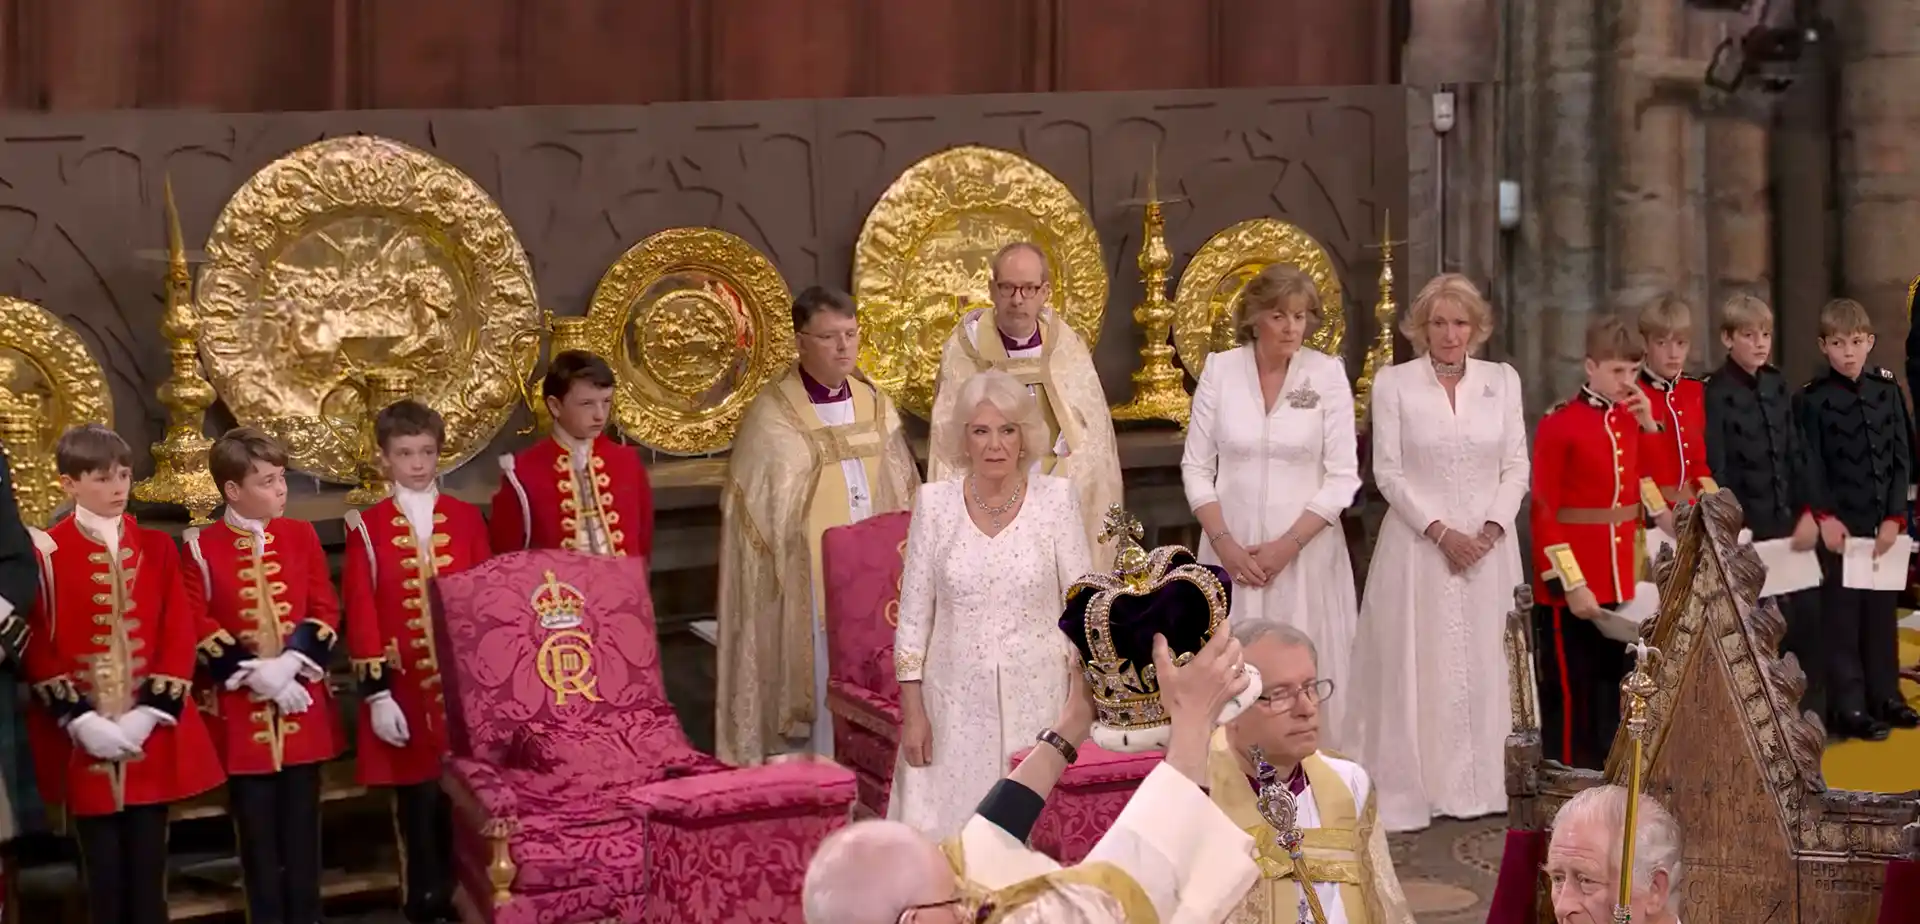 The Coronation of King Charles III, Queen Camilla and Ladies in Attendance